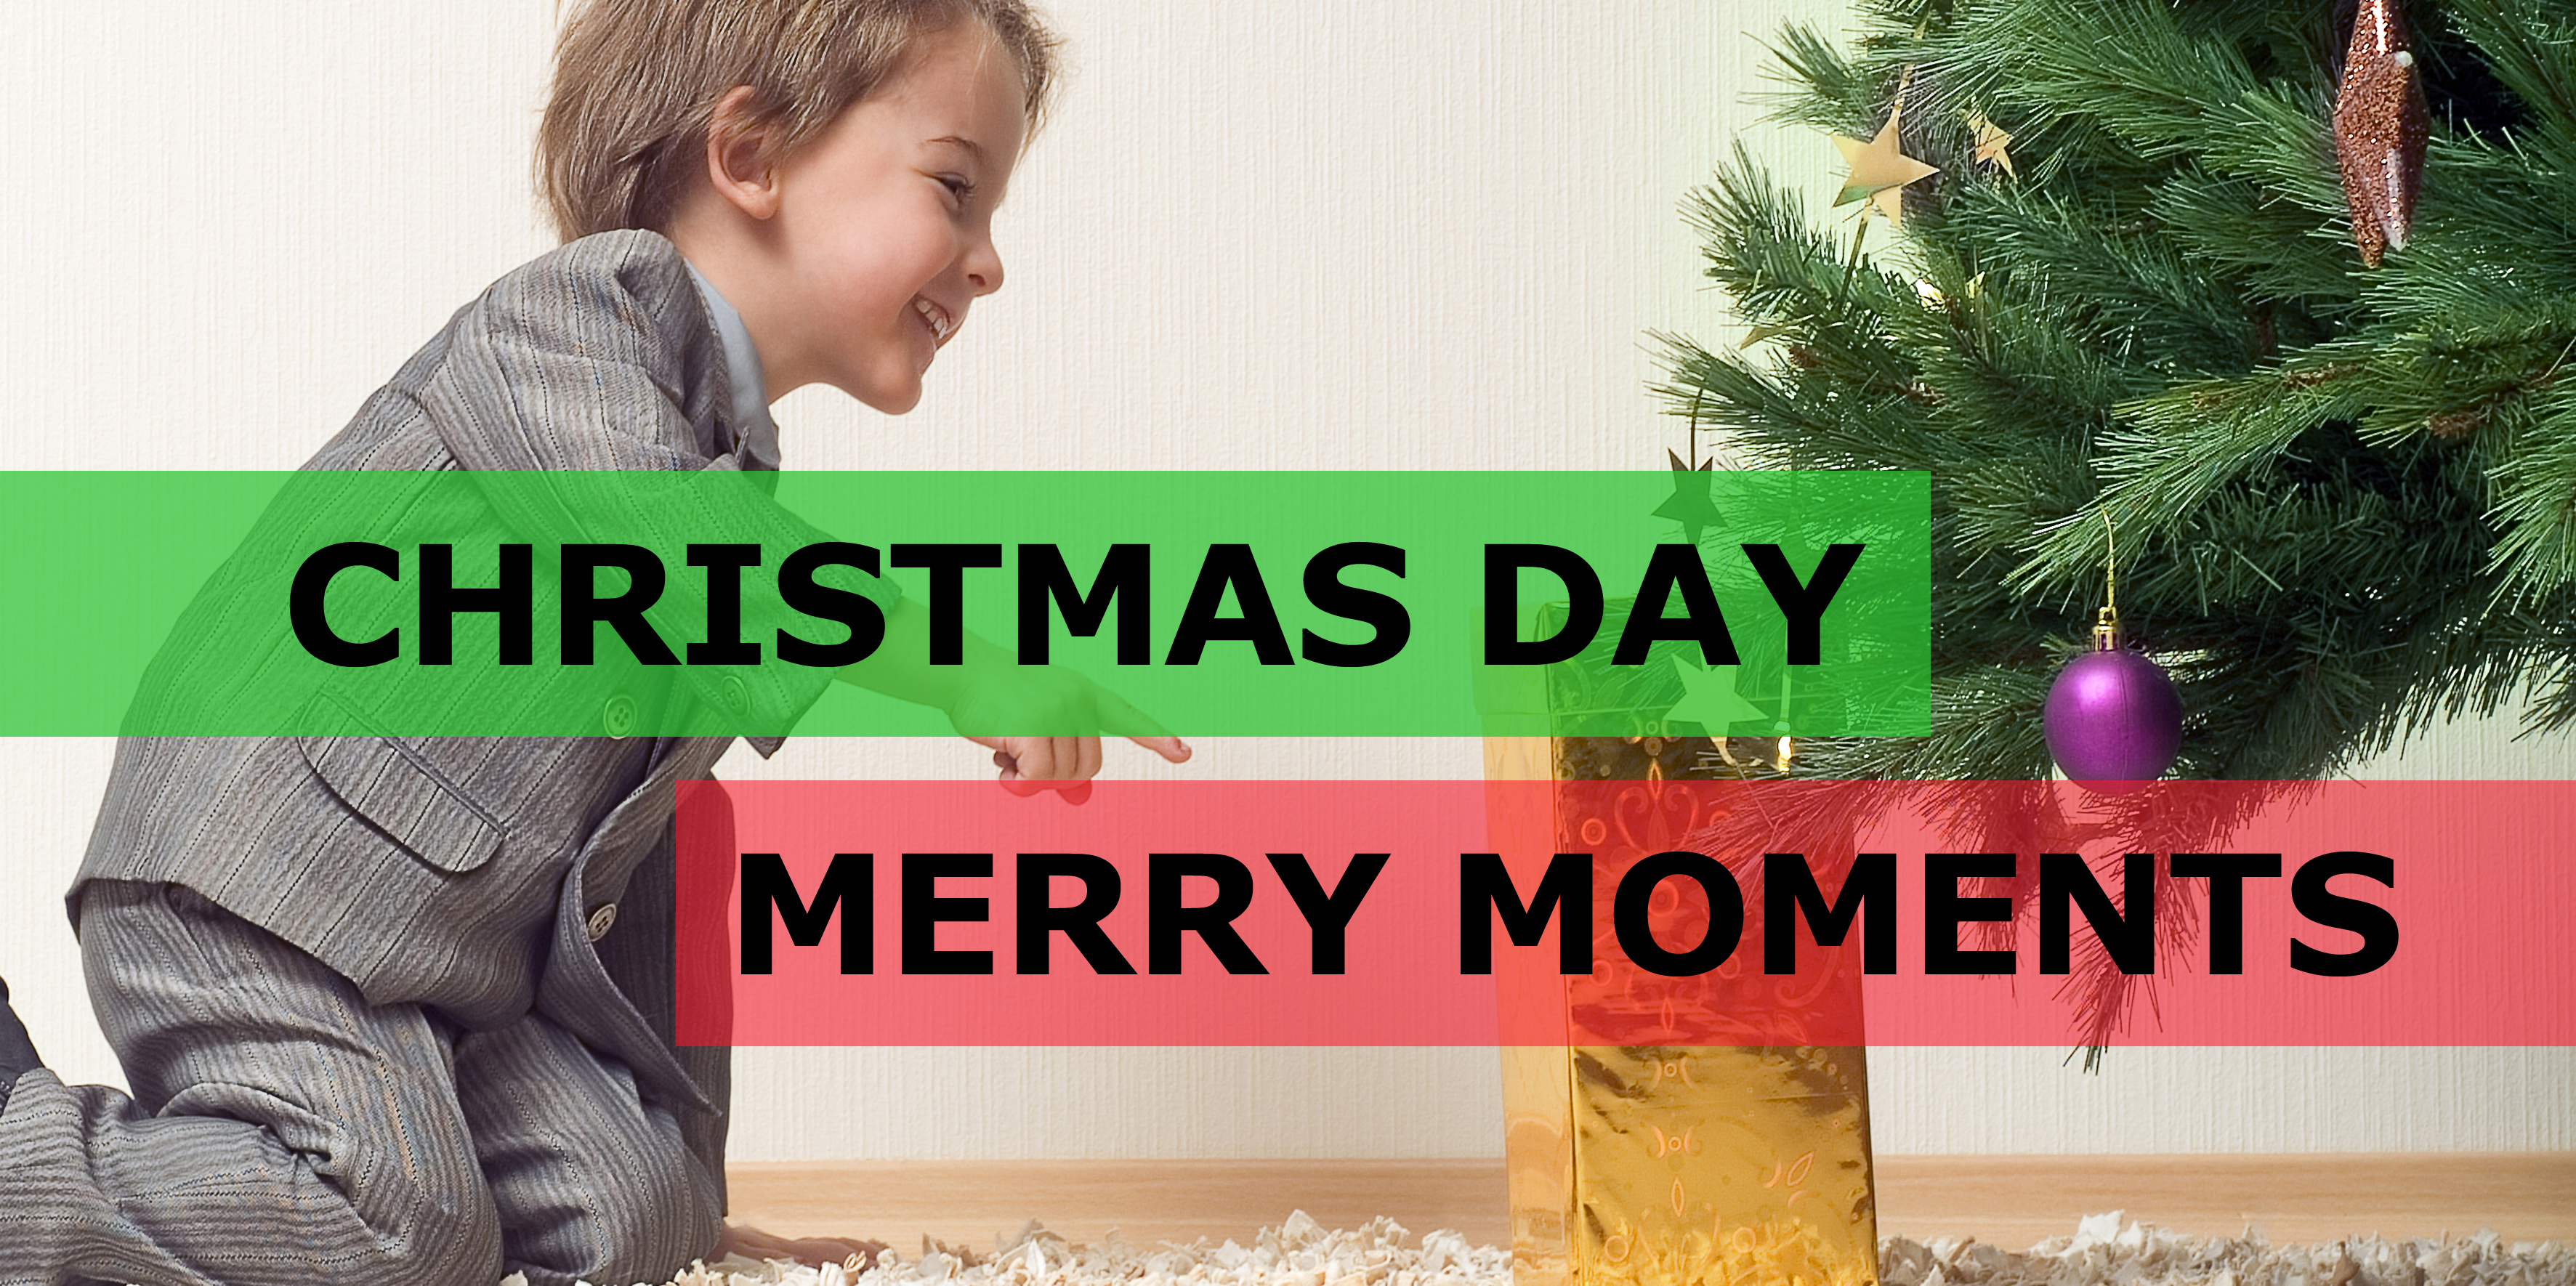 Christmas Day and Merry Moments